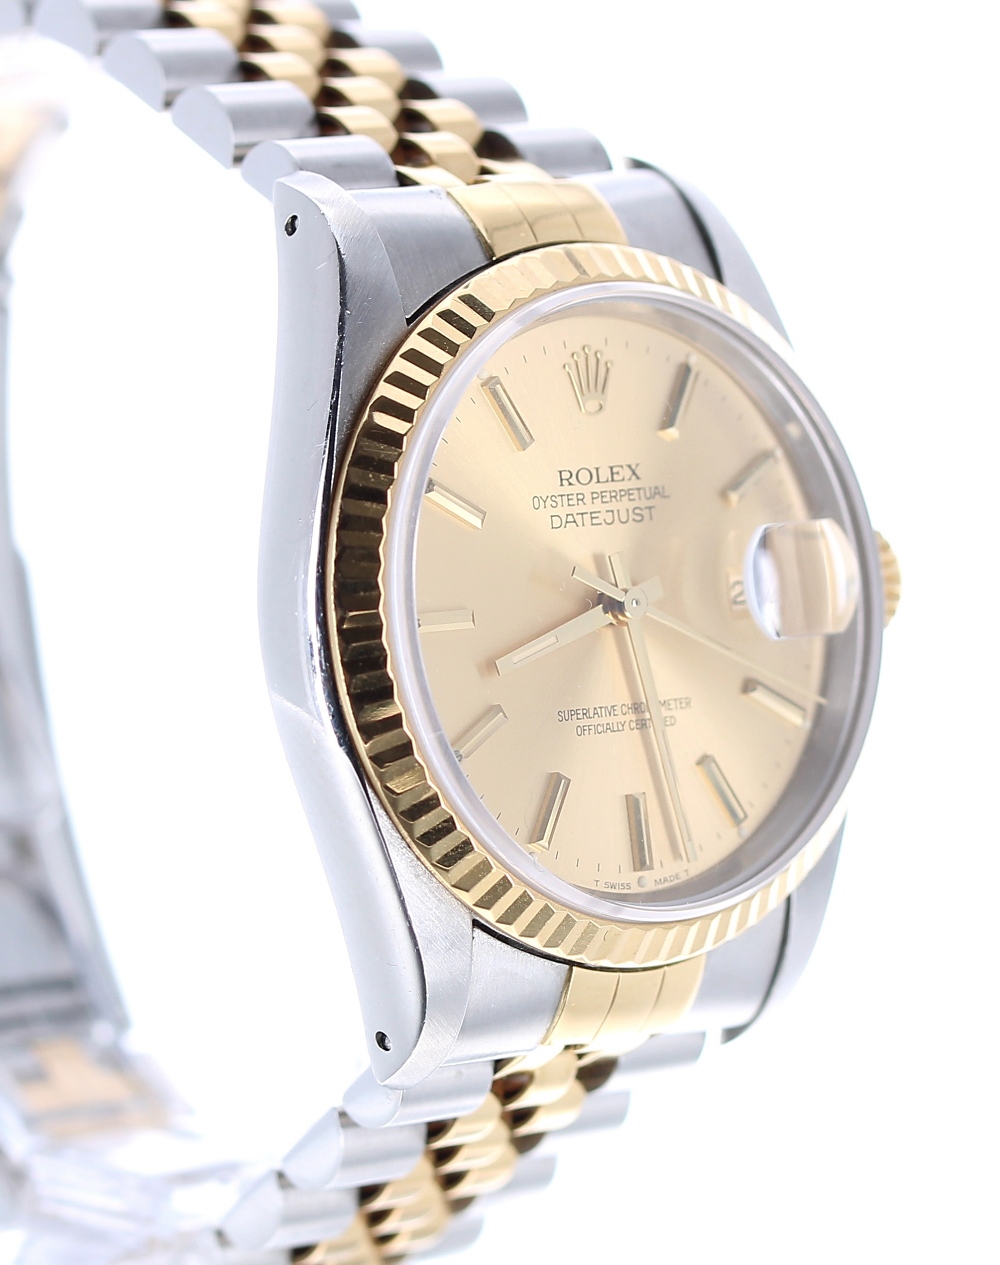 Rolex Oyster Perpetual Datejust gold and stainless steel gentleman's bracelet watch, ref. 16233, - Image 4 of 8